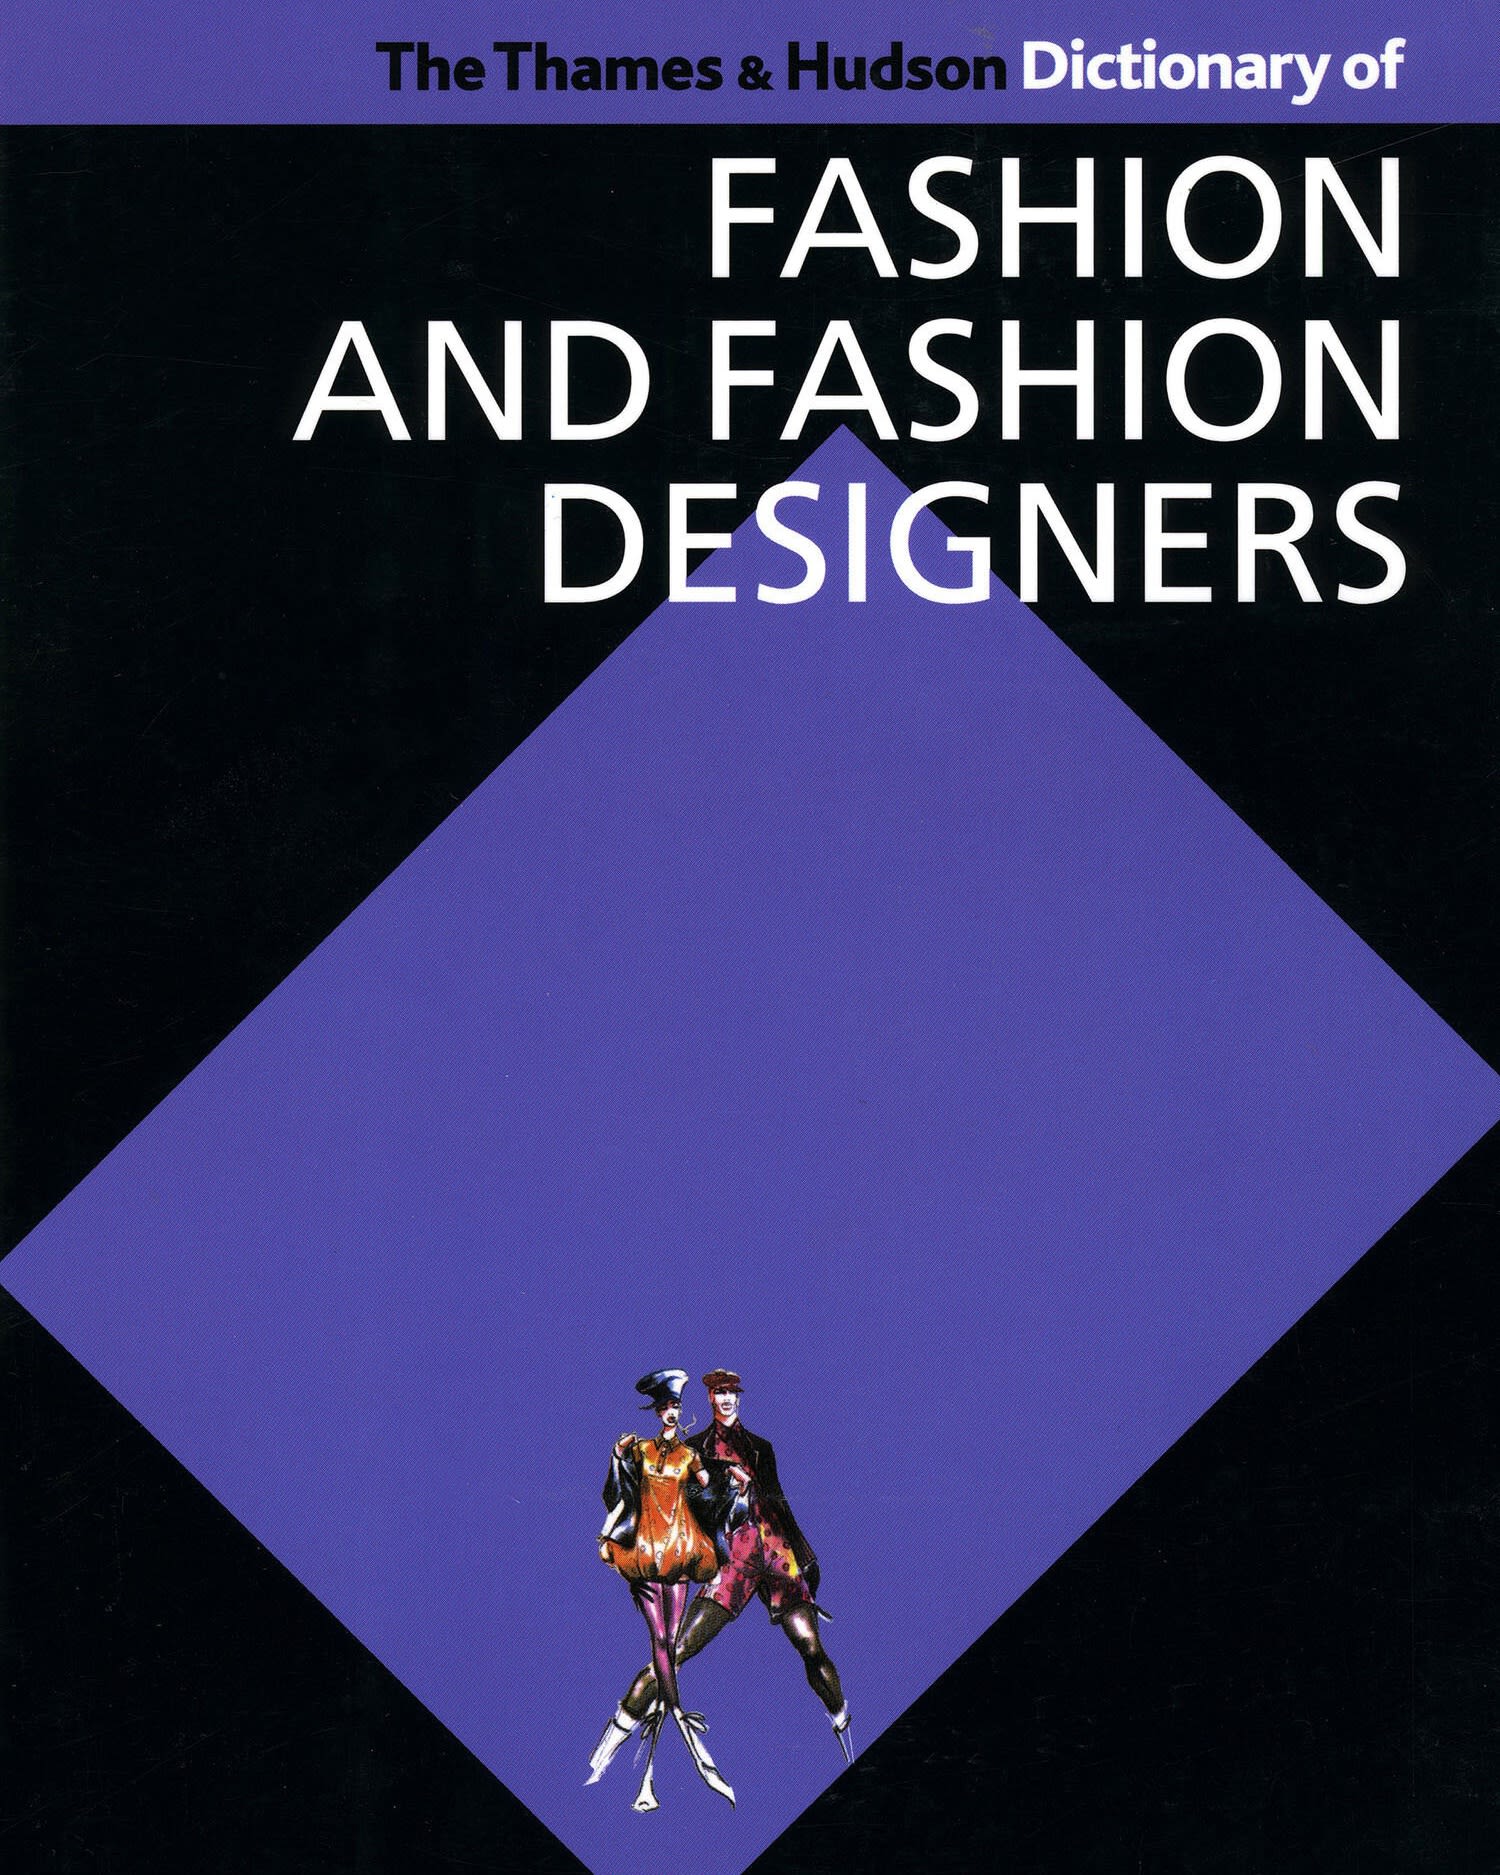 The front cover of the book The Dictionary of Fashion Designers. The page has the title in large type along with a small fashion design inspired person and clothing sketch at the bottom. 